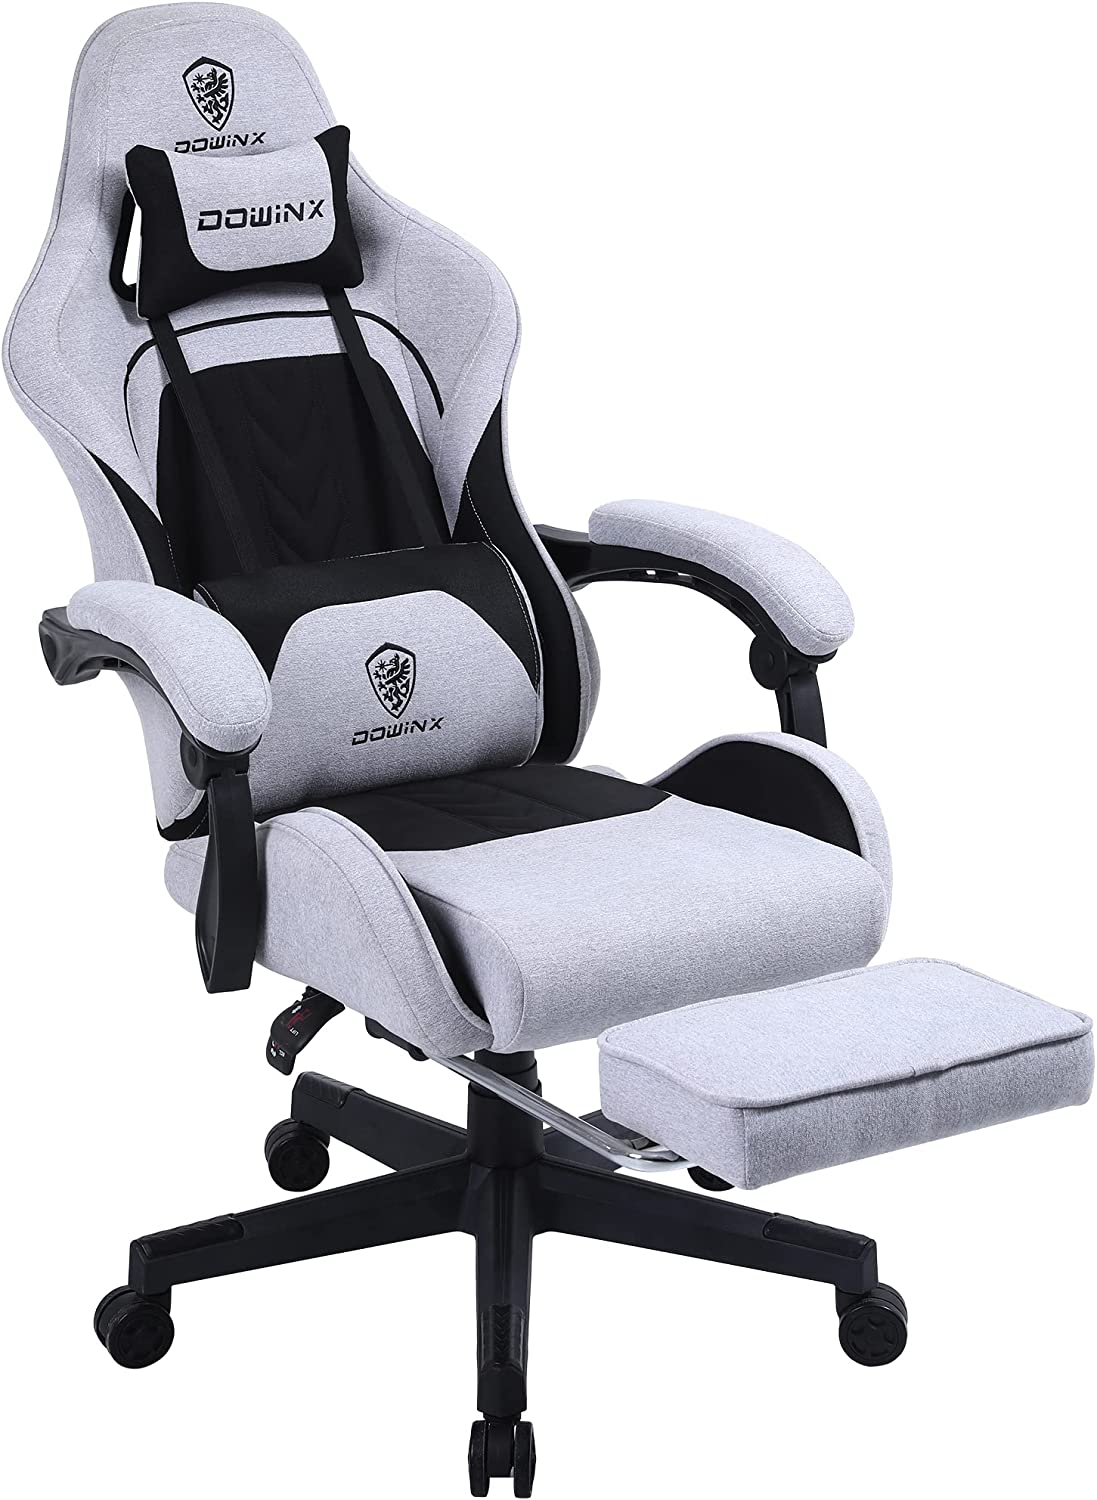 Dowinx Gaming Chair with Footrest 290LBS, Black and Grey